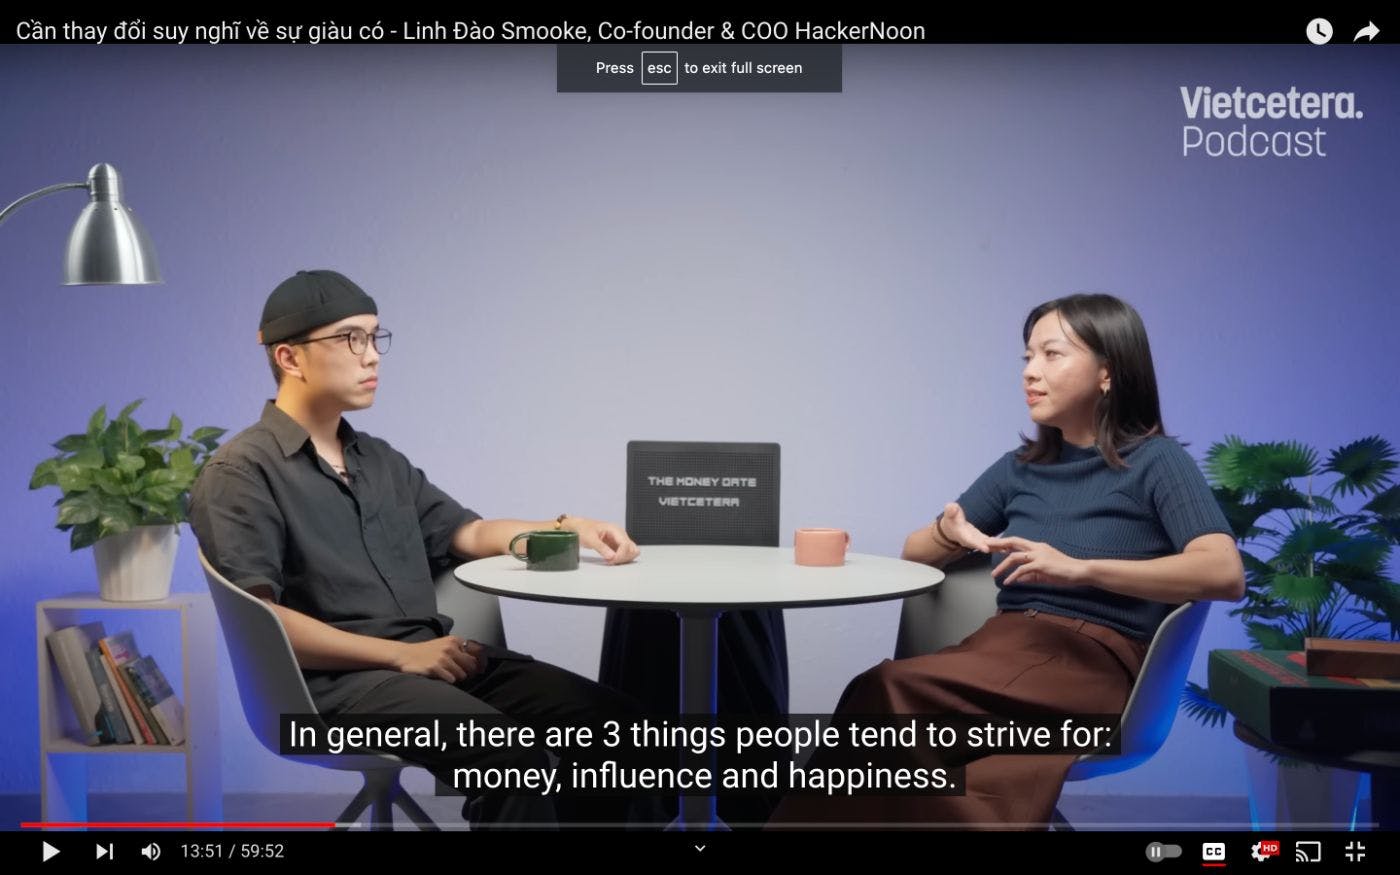 /we-need-to-change-our-mindset-about-wealth-ft-linh-dao-smooke-and-host-an-truong-of-vietcetera feature image